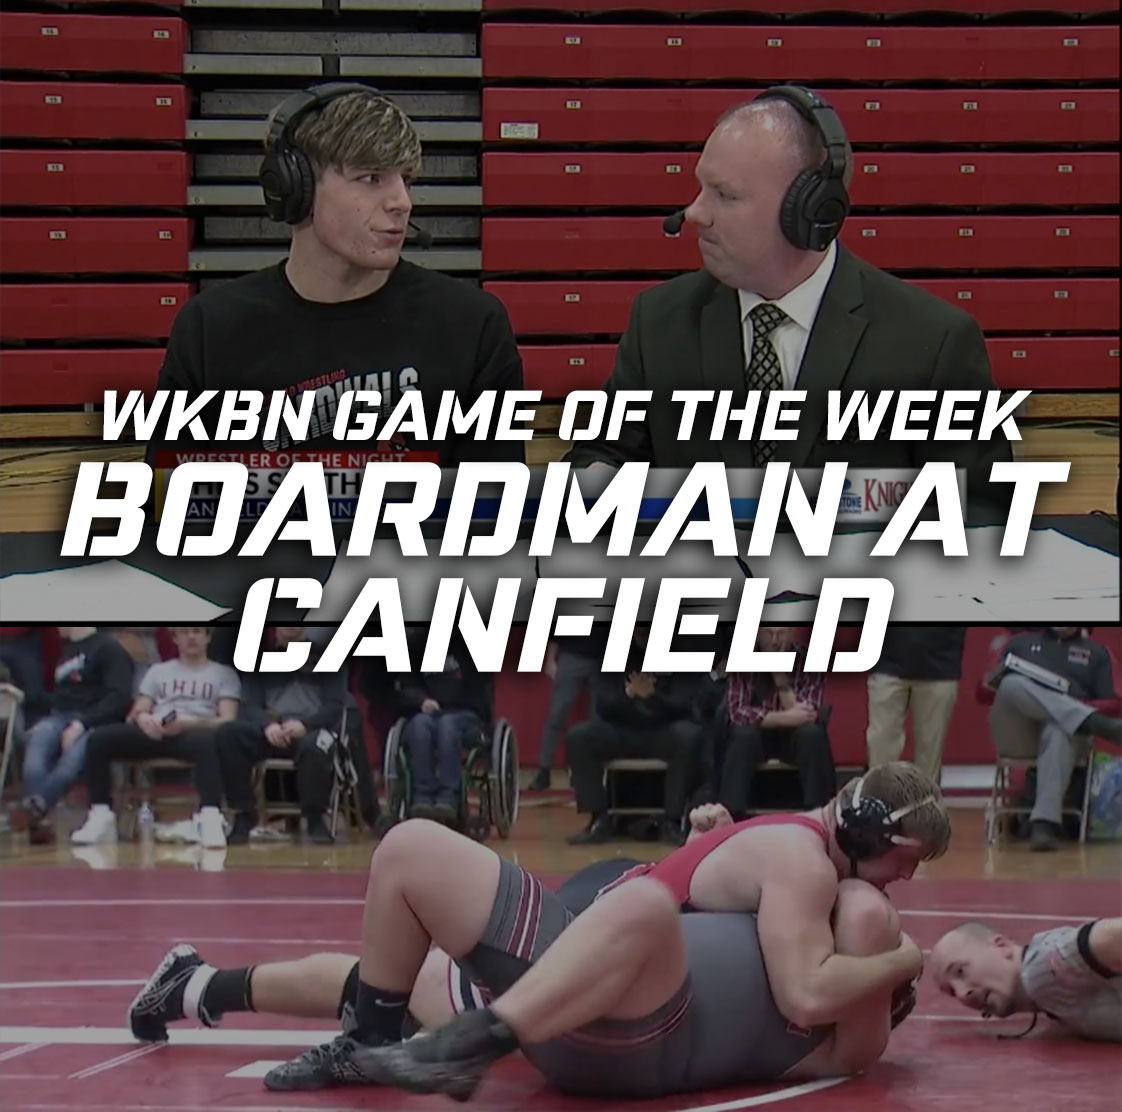 WKBN Game of the Week Boardman at Canfield